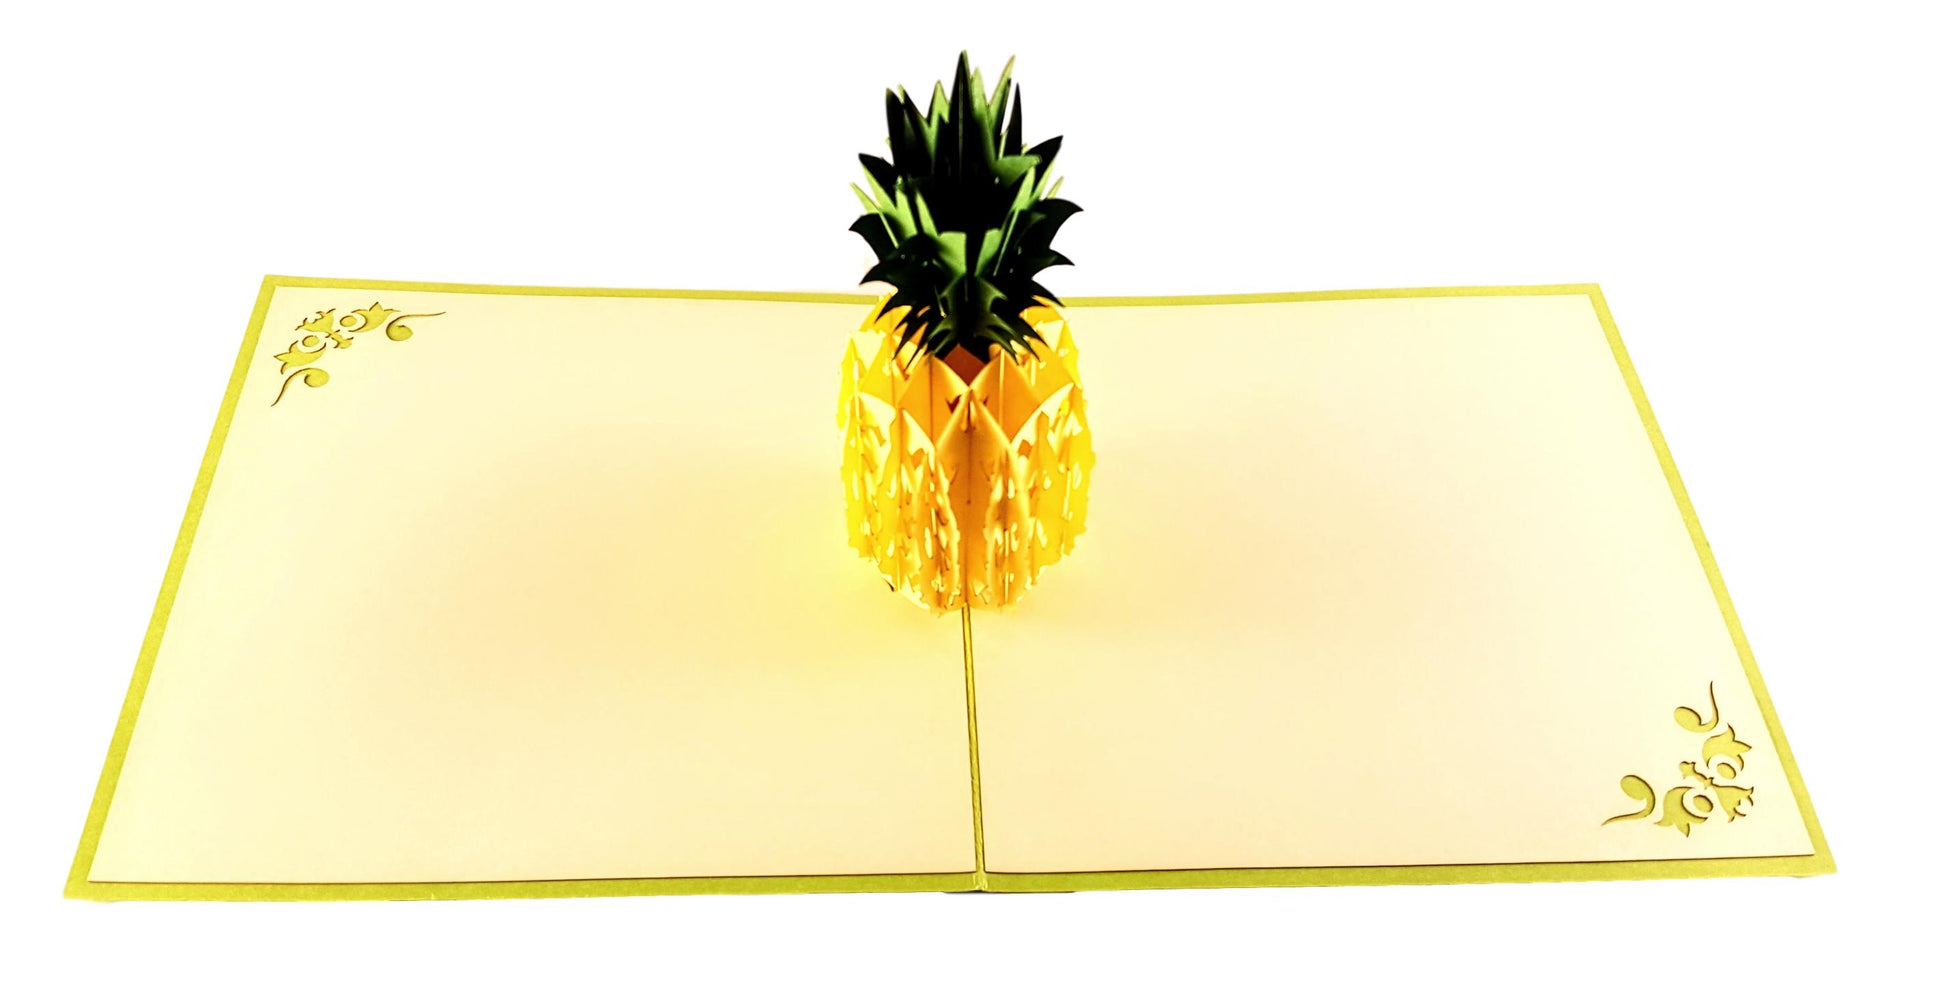 Pineapple 3D Pop Up Greeting Card - Get Well - Just Because - Love - Special Days - Thank You - iGifts And Cards